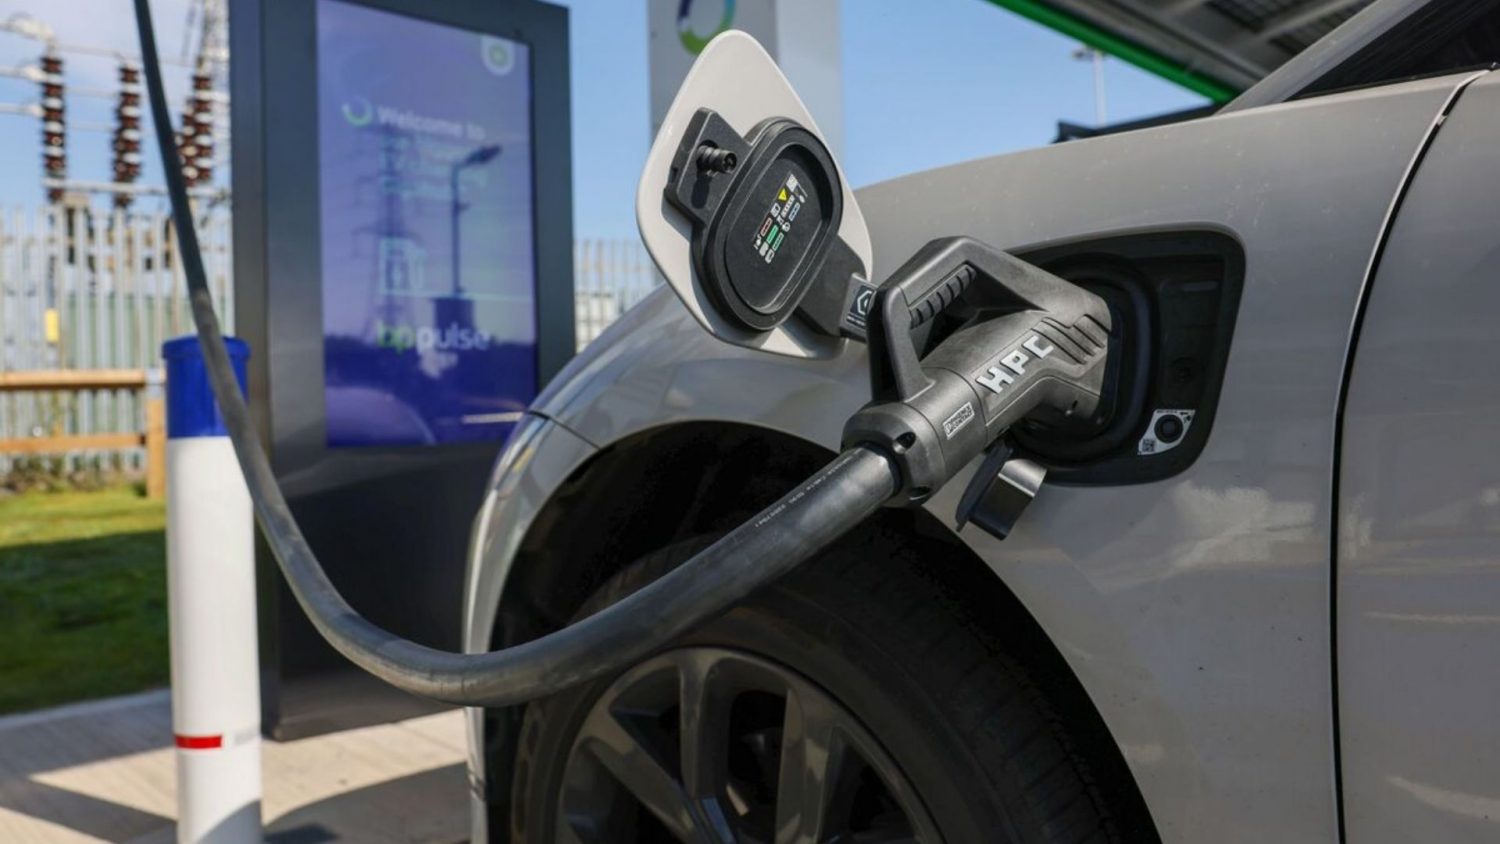 BP, is the first company to buy $100 million of Tesla's Supercharger hardware, to use in a third-party charging network.